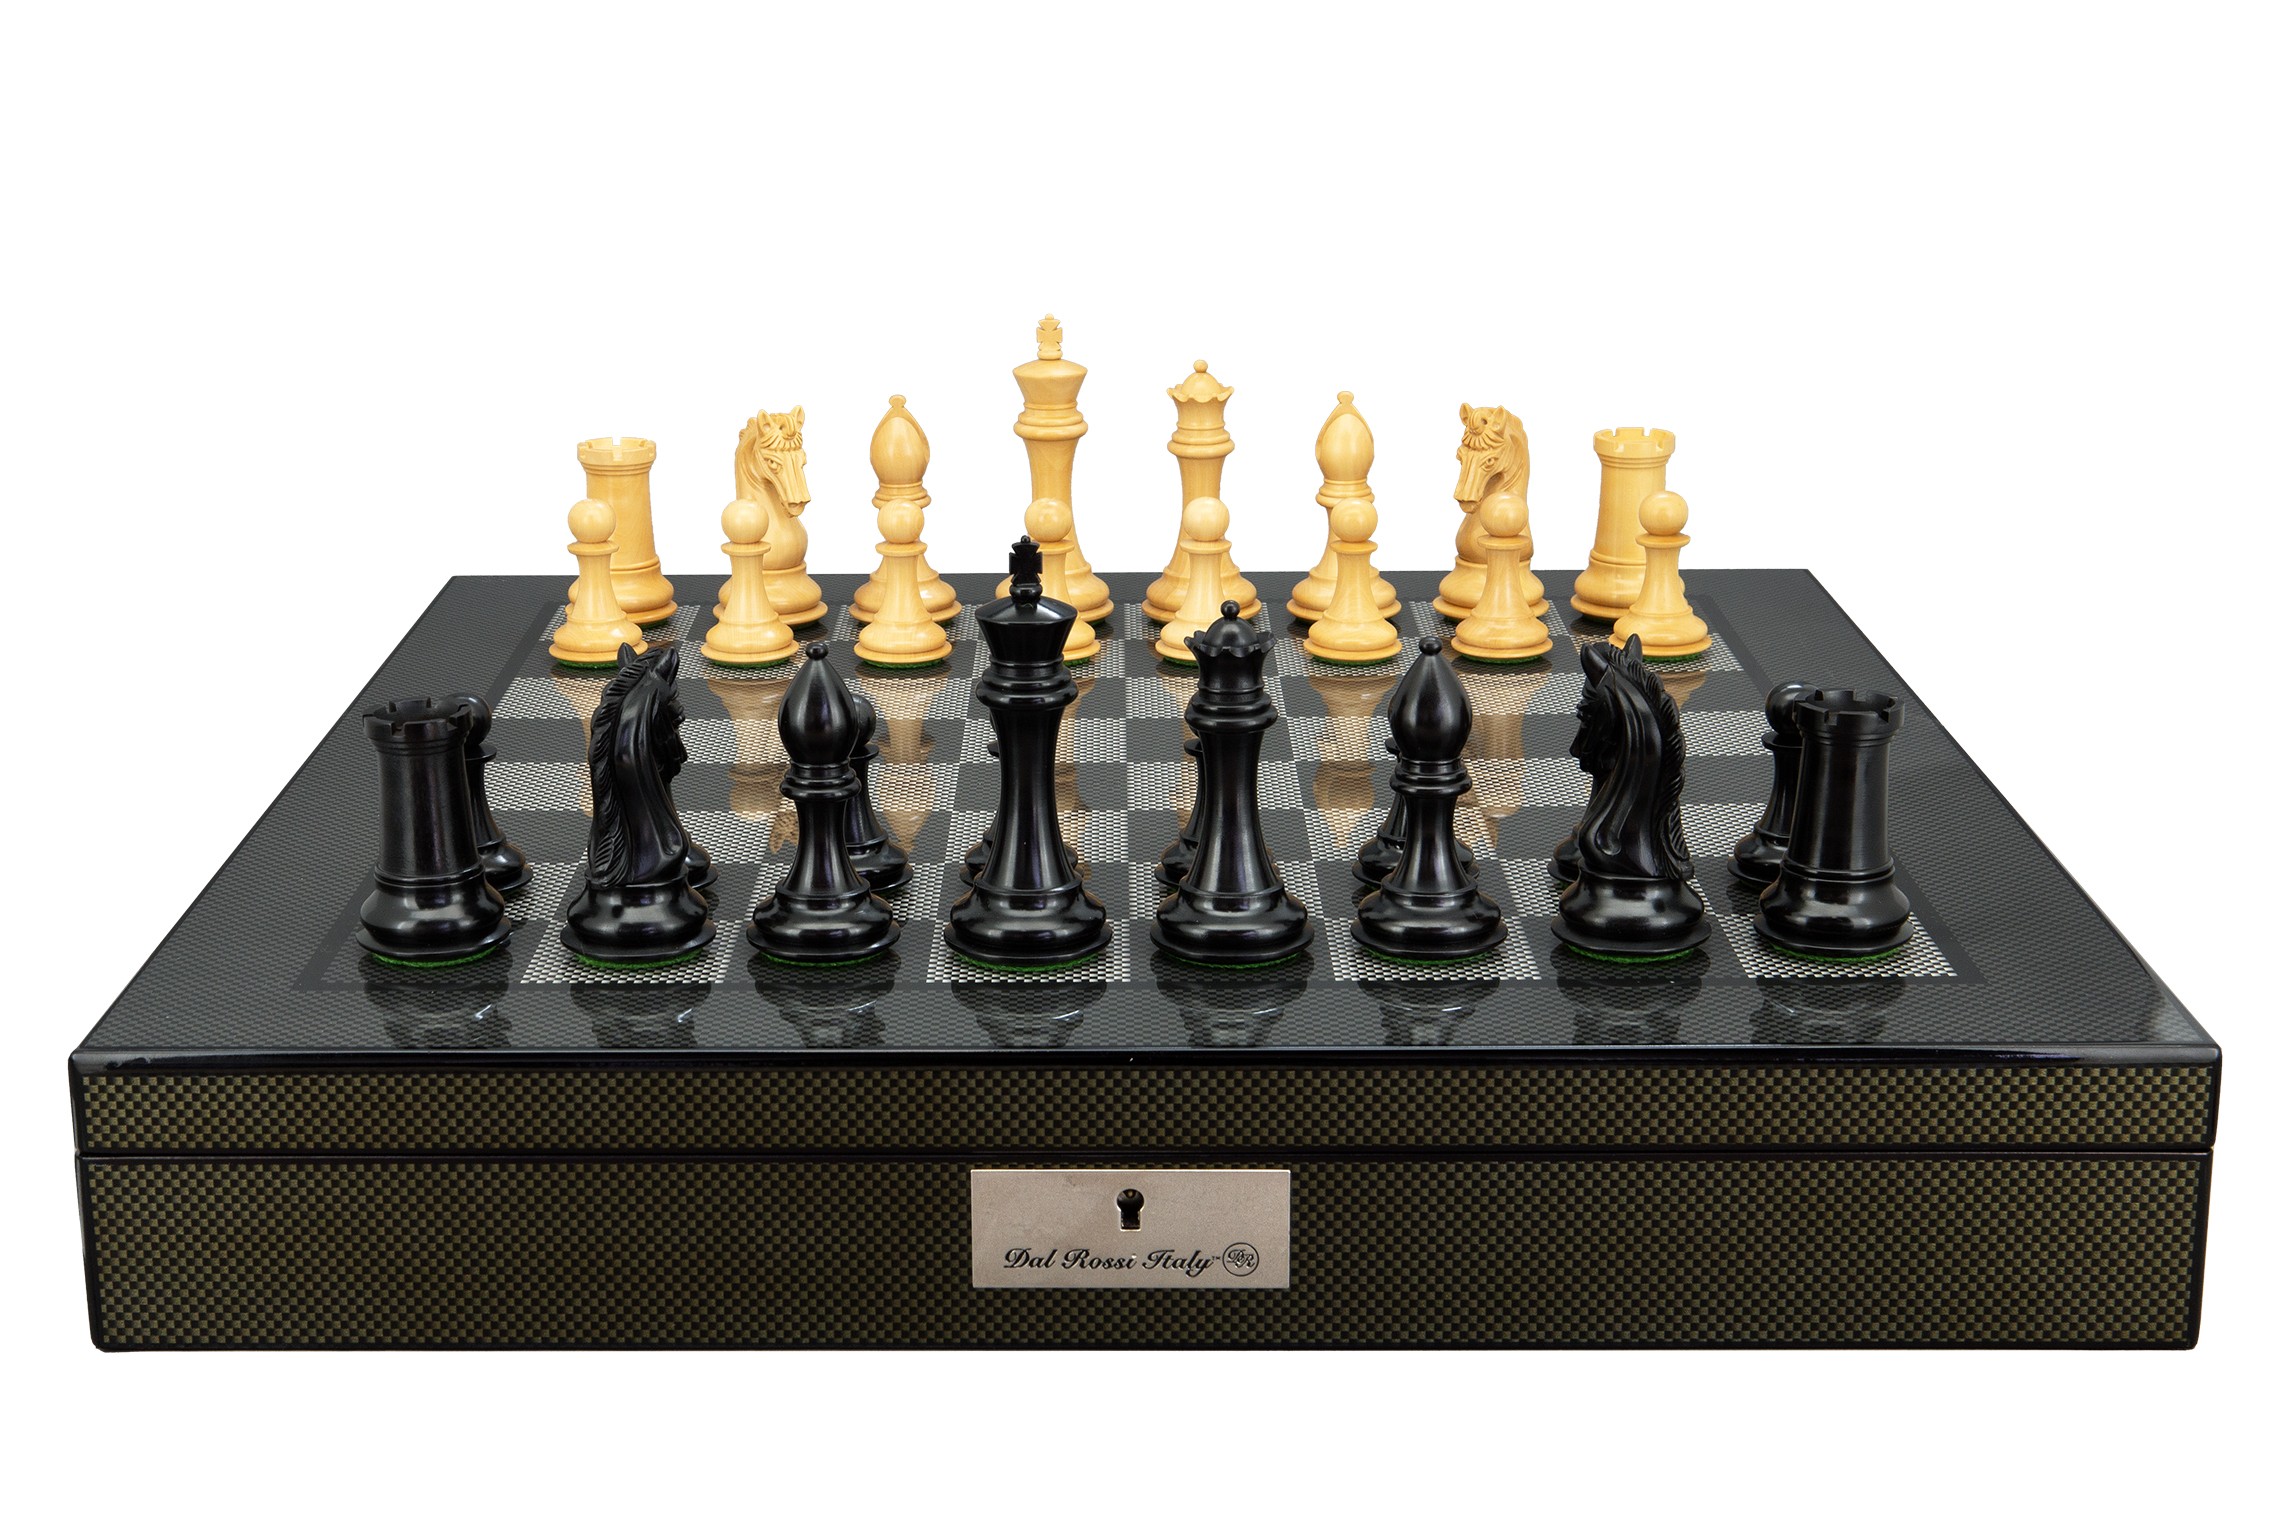 Dal Rossi Italy, Ebony Finish / Boxwood 105mm Wood Double Weighted on a Carbon Fibre Finish Shiny Chess Box with Compartments 20"